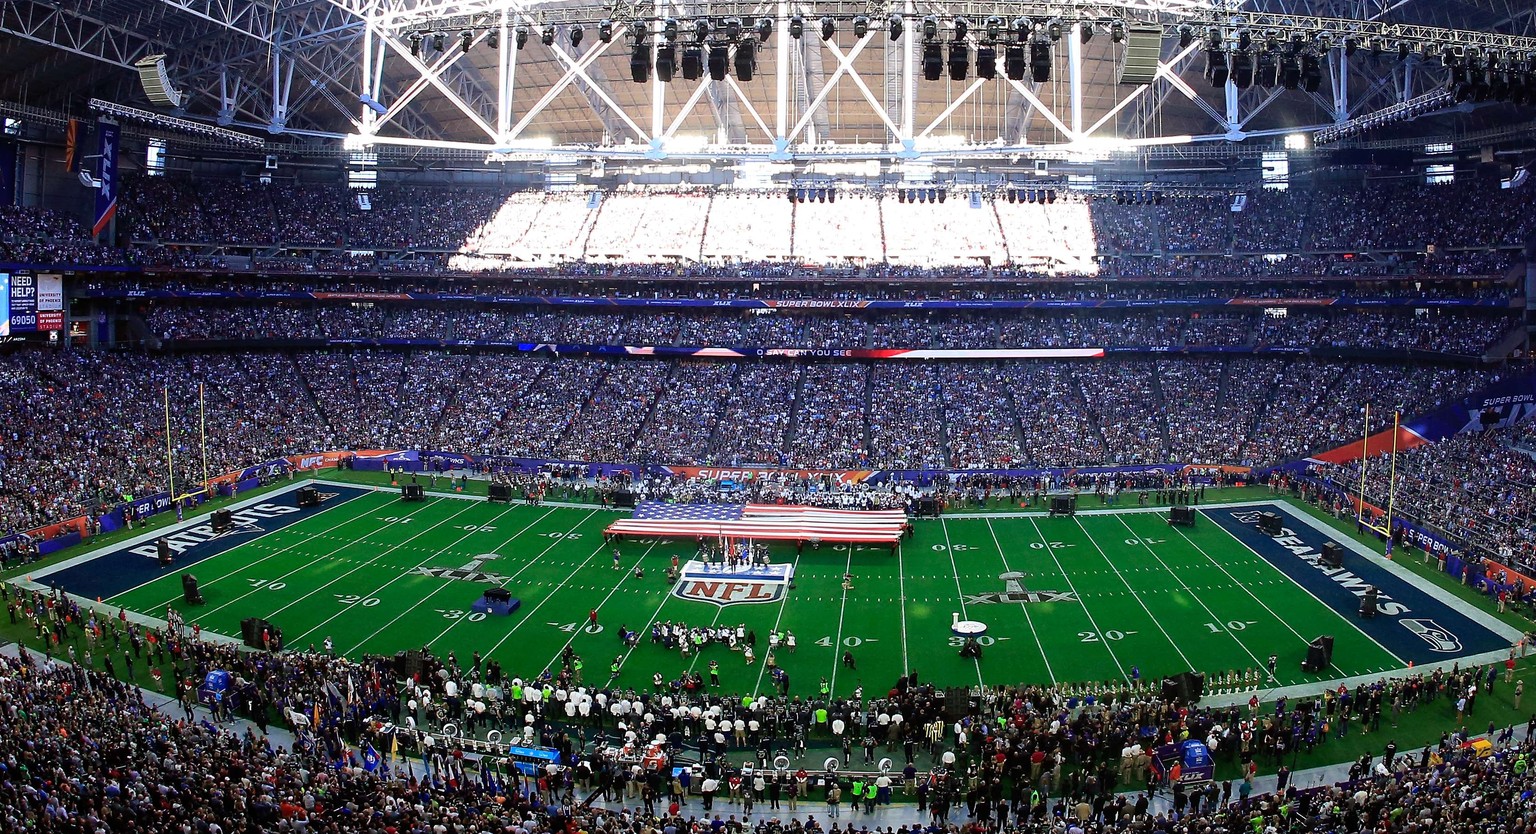 GLENDALE, AZ - FEBRUARY 01: A general view as the national anthem is performed prior to Super Bowl XLIX at University of Phoenix Stadium on February 1, 2015 in Glendale, Arizona. Jamie Squire/Getty Im ...